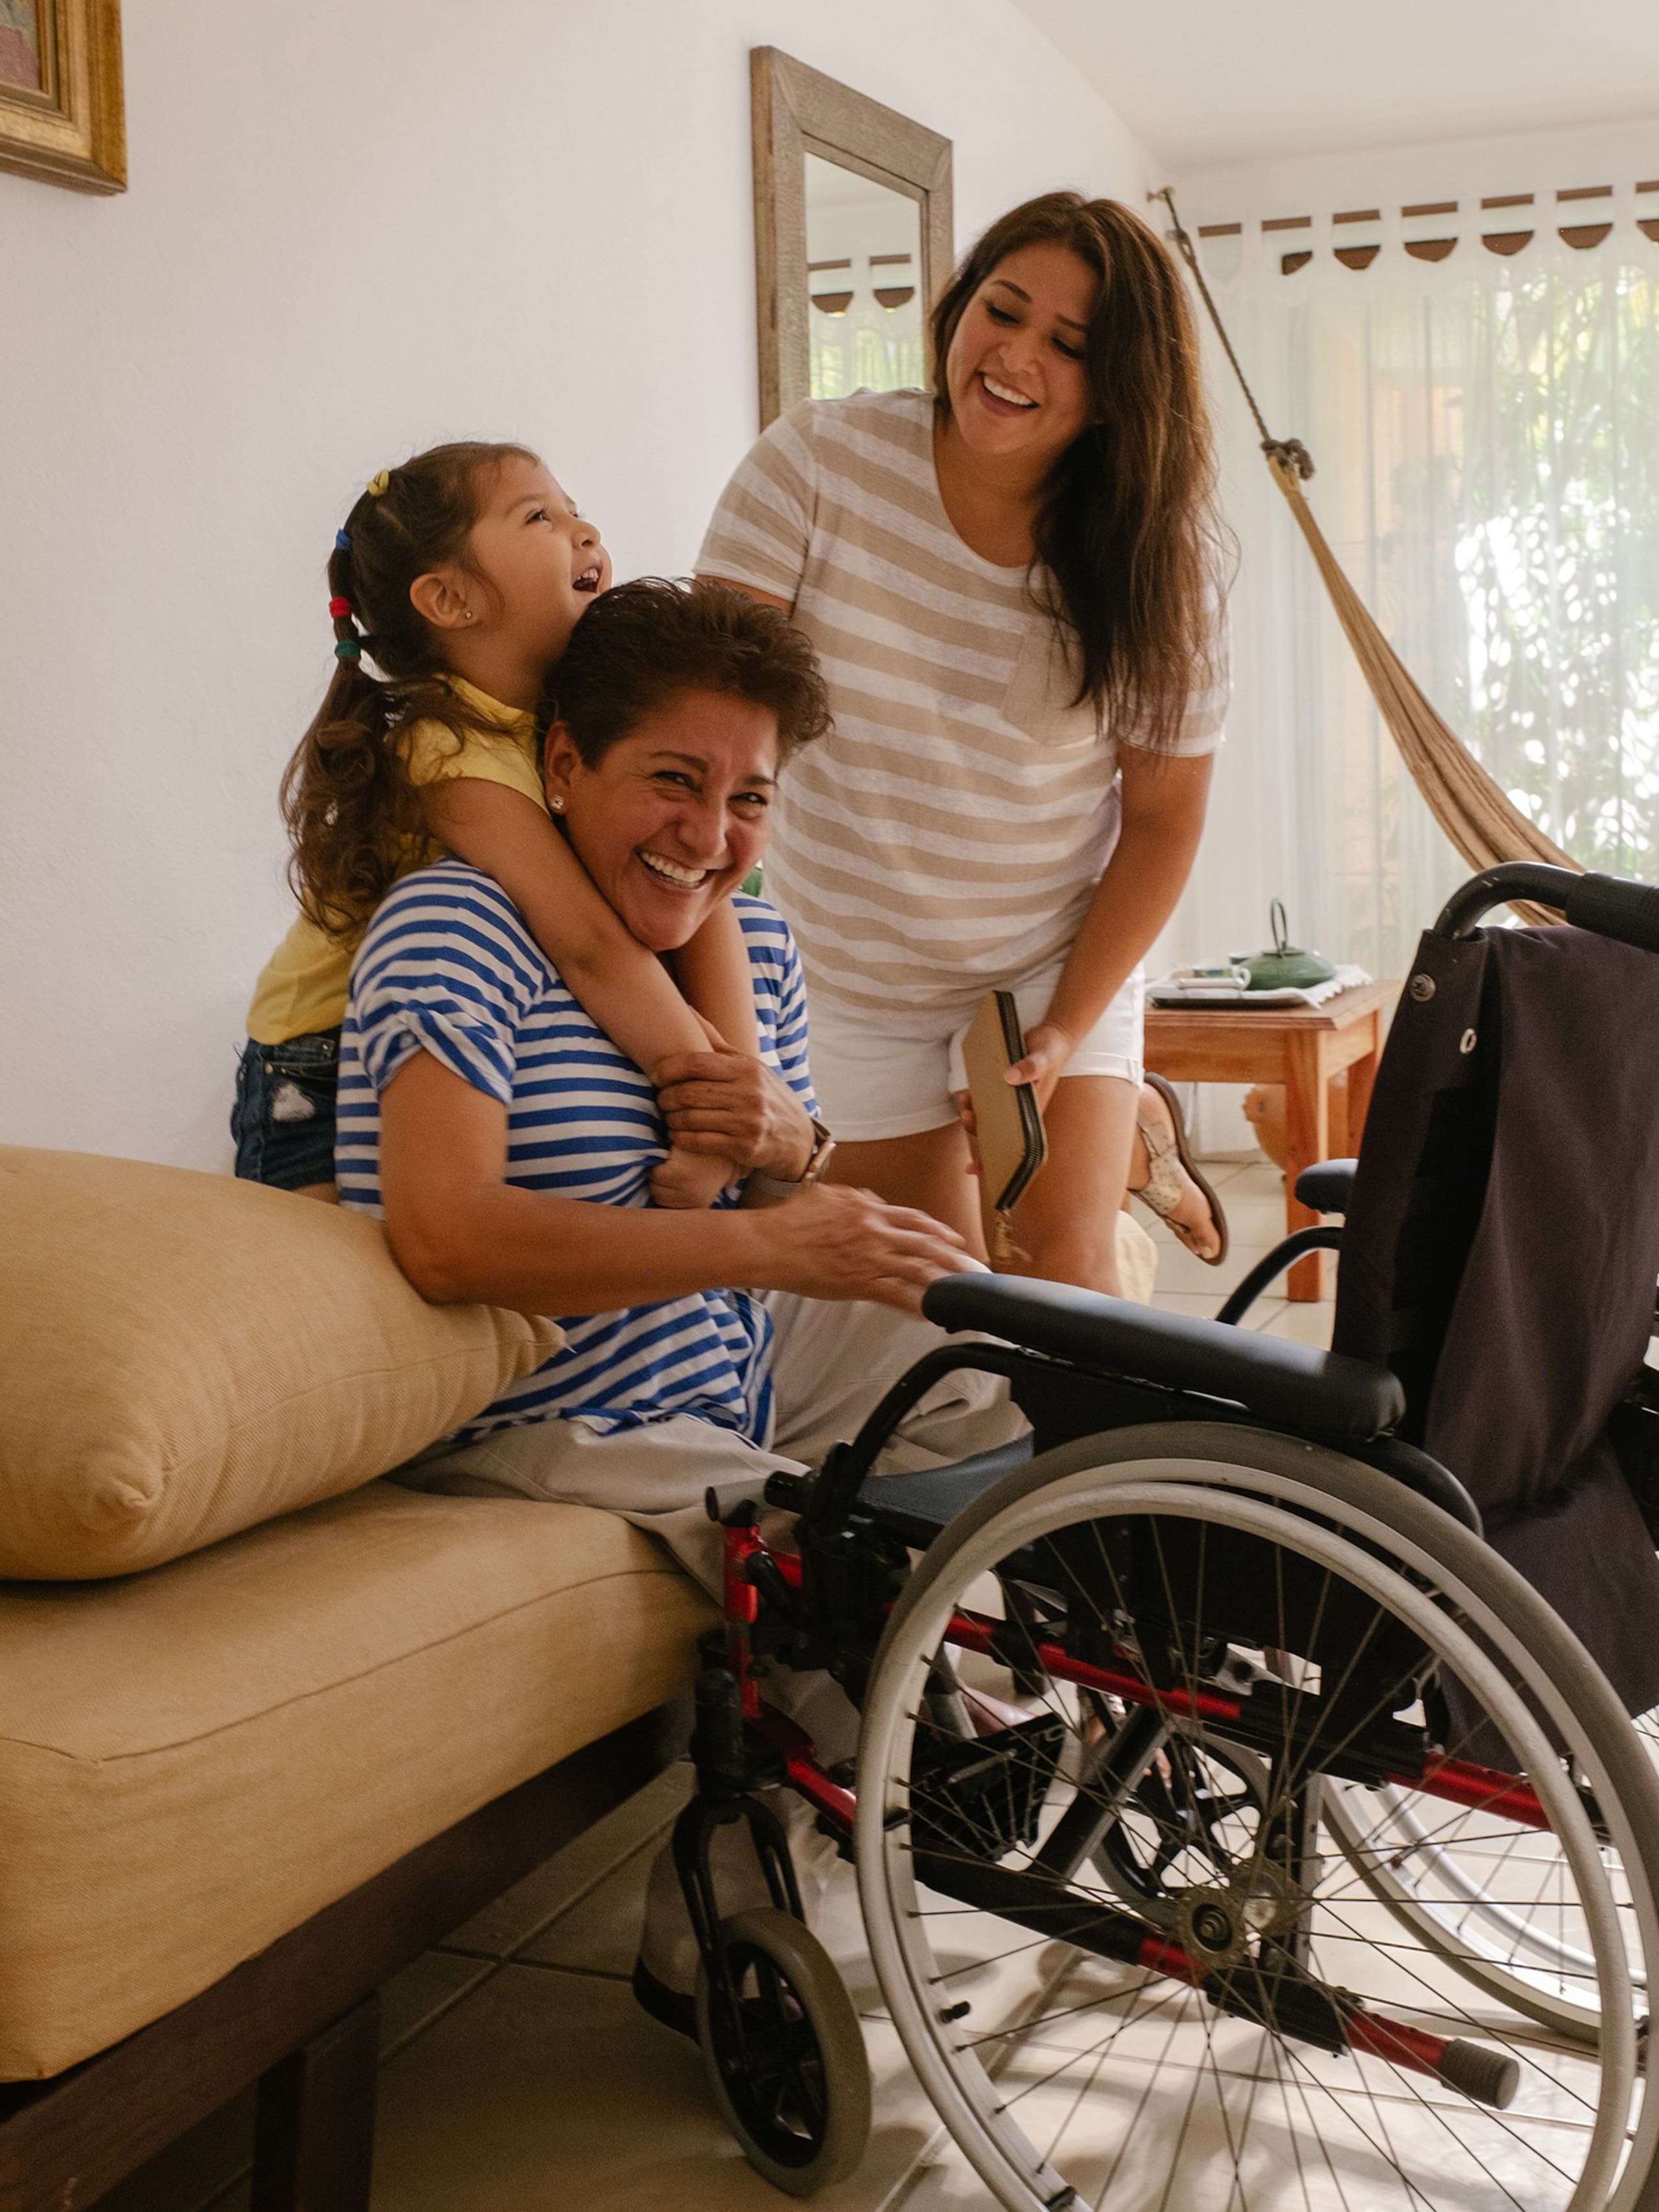 Three generations of a family are smiling and laughing in an accessible Airbnb home. In front of the oldest family member is a wheelchair.